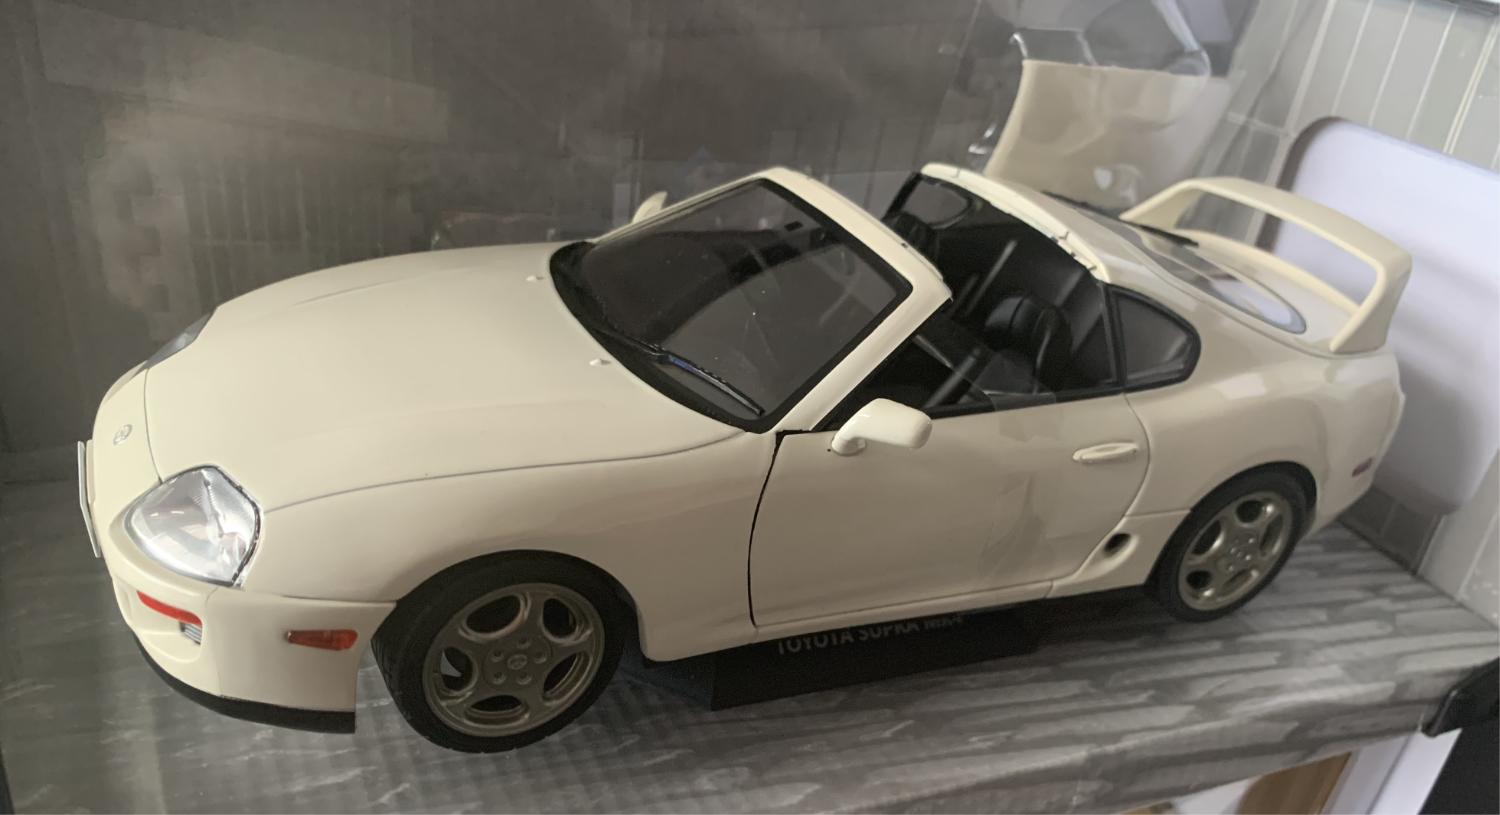 A very good representation of the Toyota Supra Targa mk 4 decorated in white with high rear spoiler, side air vents